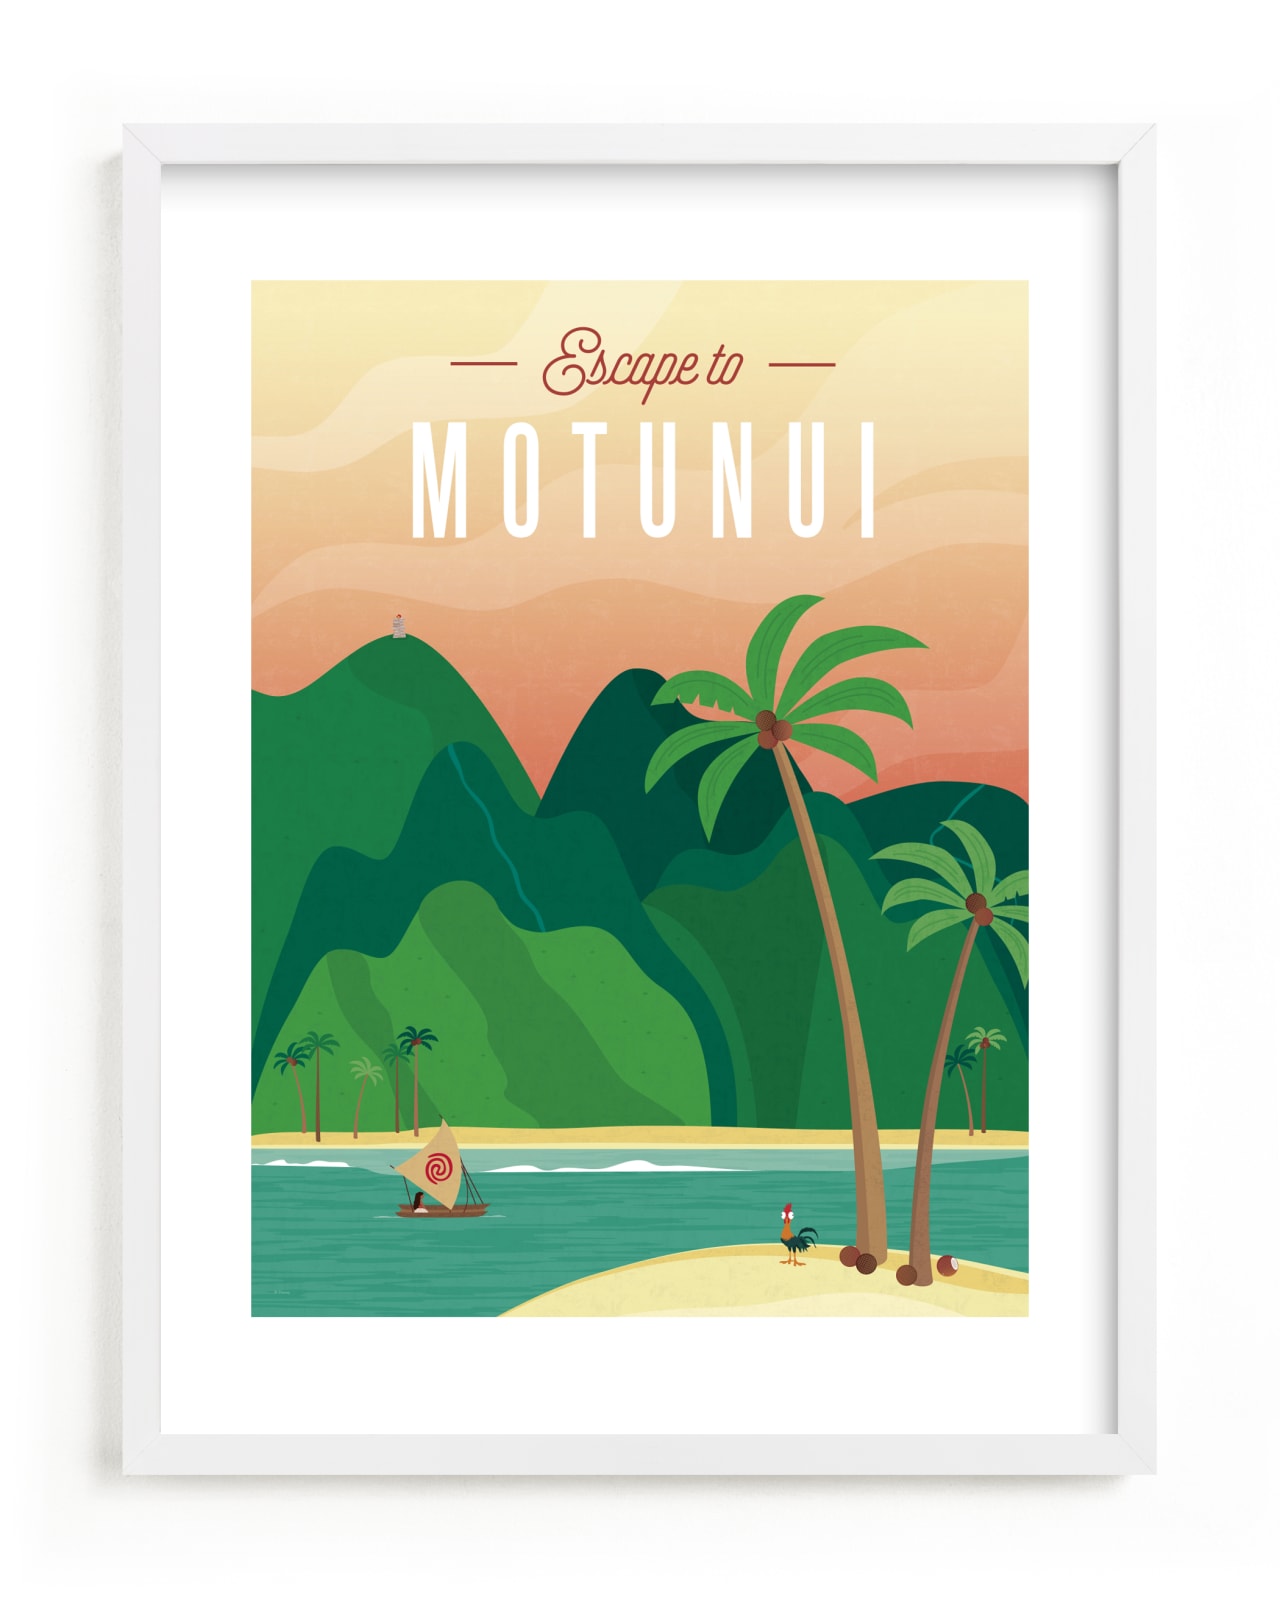 This is a colorful disney art by Erica Krystek called Escape to Motunui | Moana.